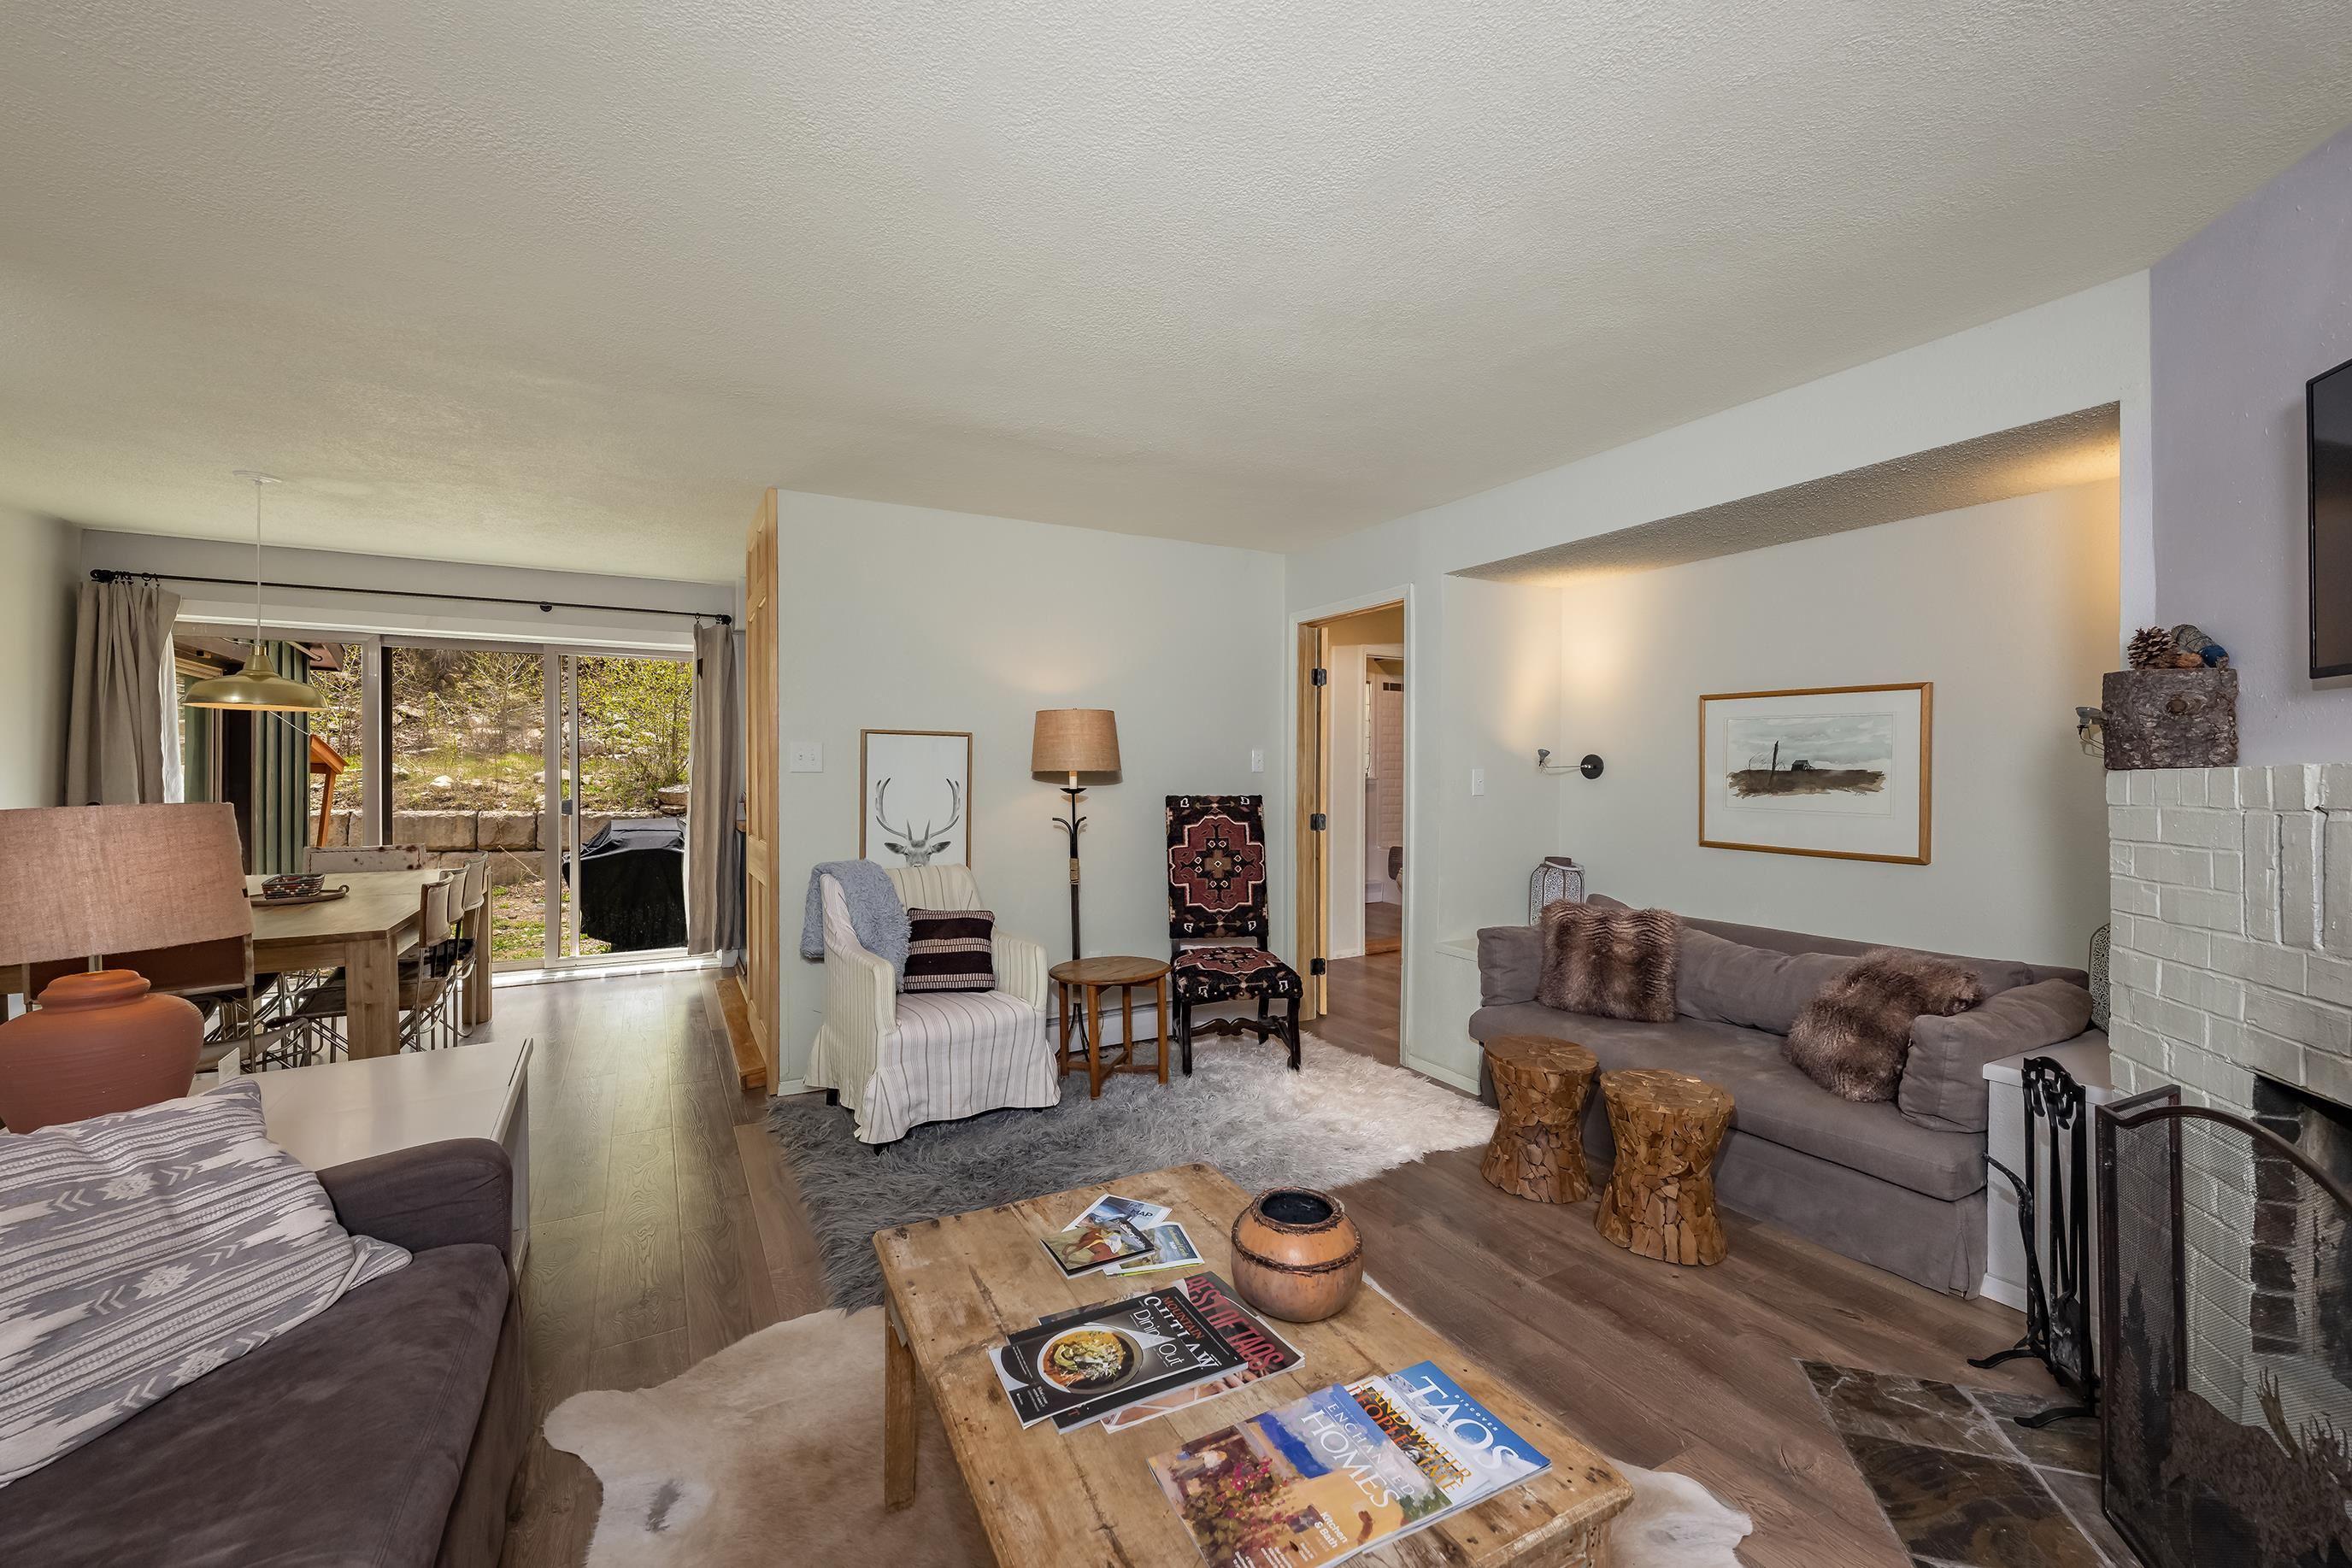 1074 Nm 150 7 7-14, Taos Ski Valley, New Mexico, 87525, United States, 4 Bedrooms Bedrooms, ,3 BathroomsBathrooms,Residential,For Sale,1074 Nm 150 7 7-14,1450870